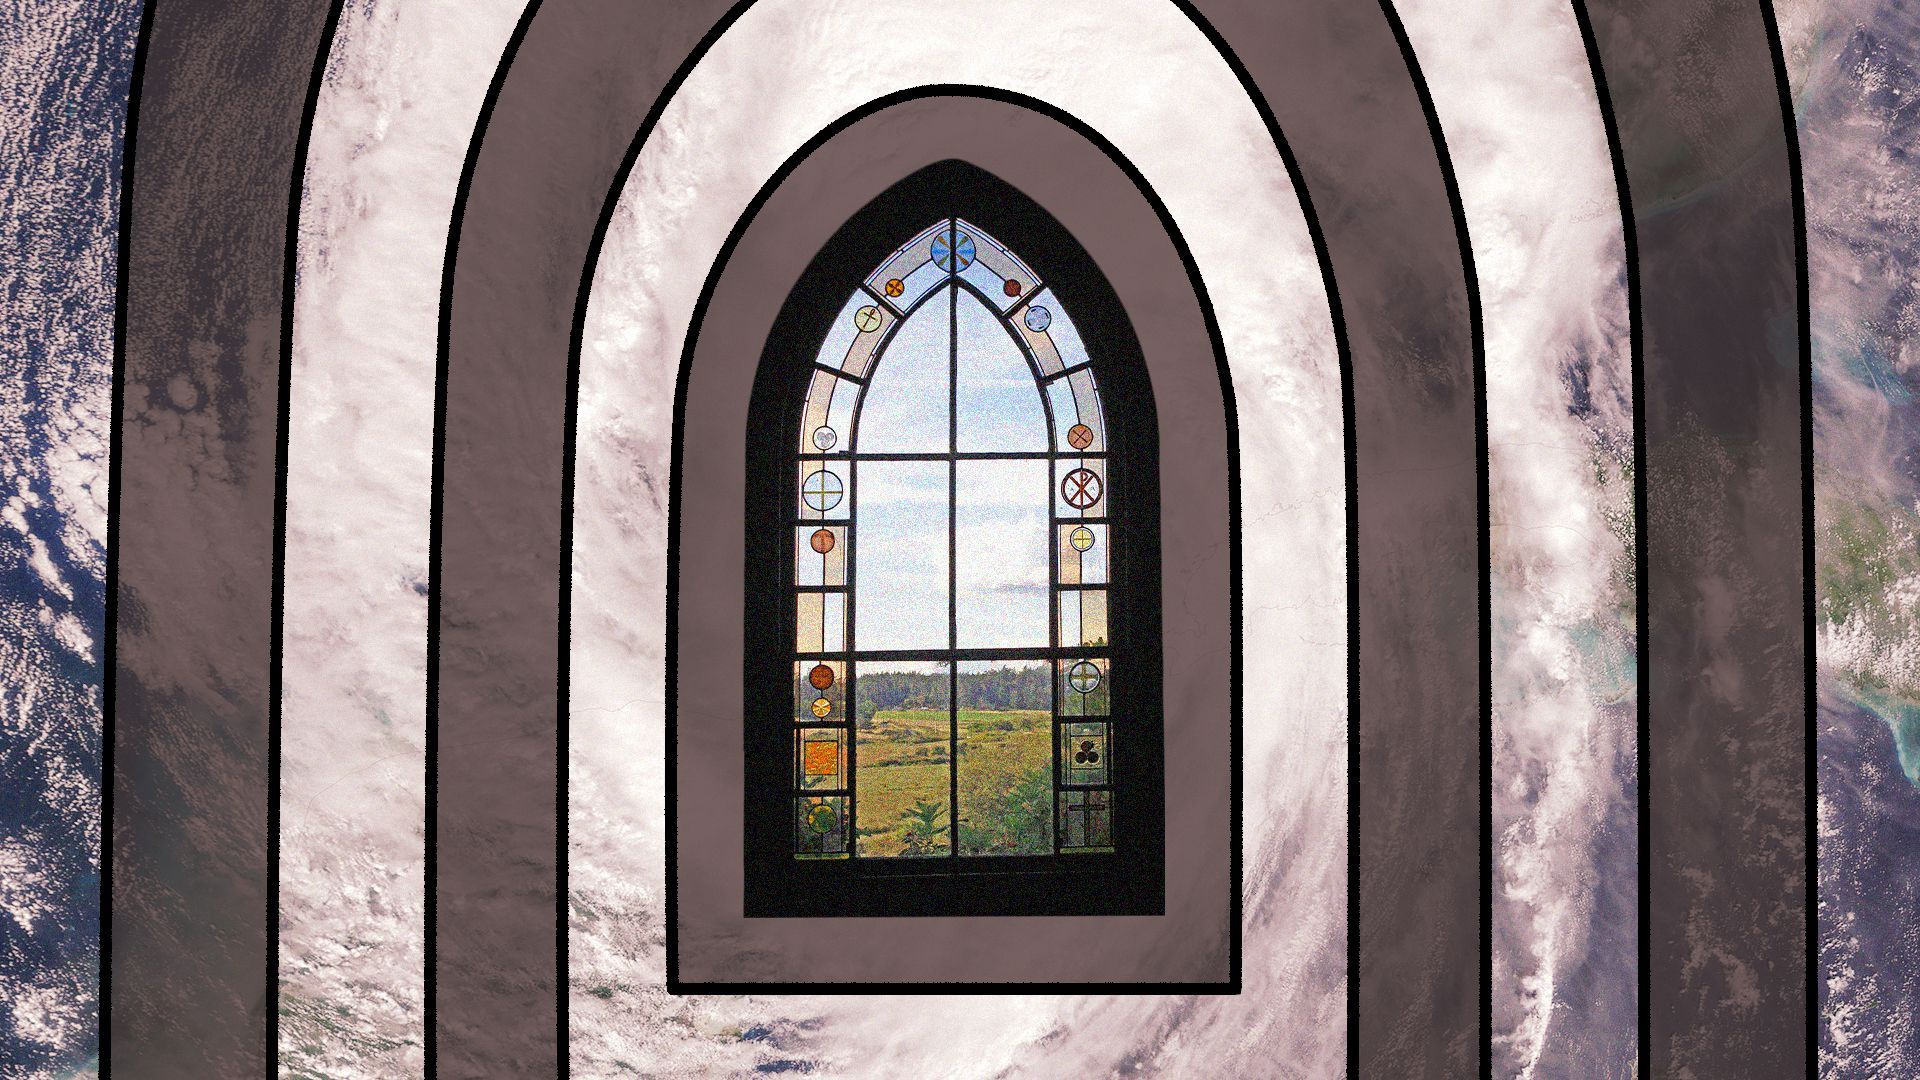 Photo illustration collage of a stained glass church window surrounded by radiating window-shapes filled with a satellite image of Hurricane Wilma